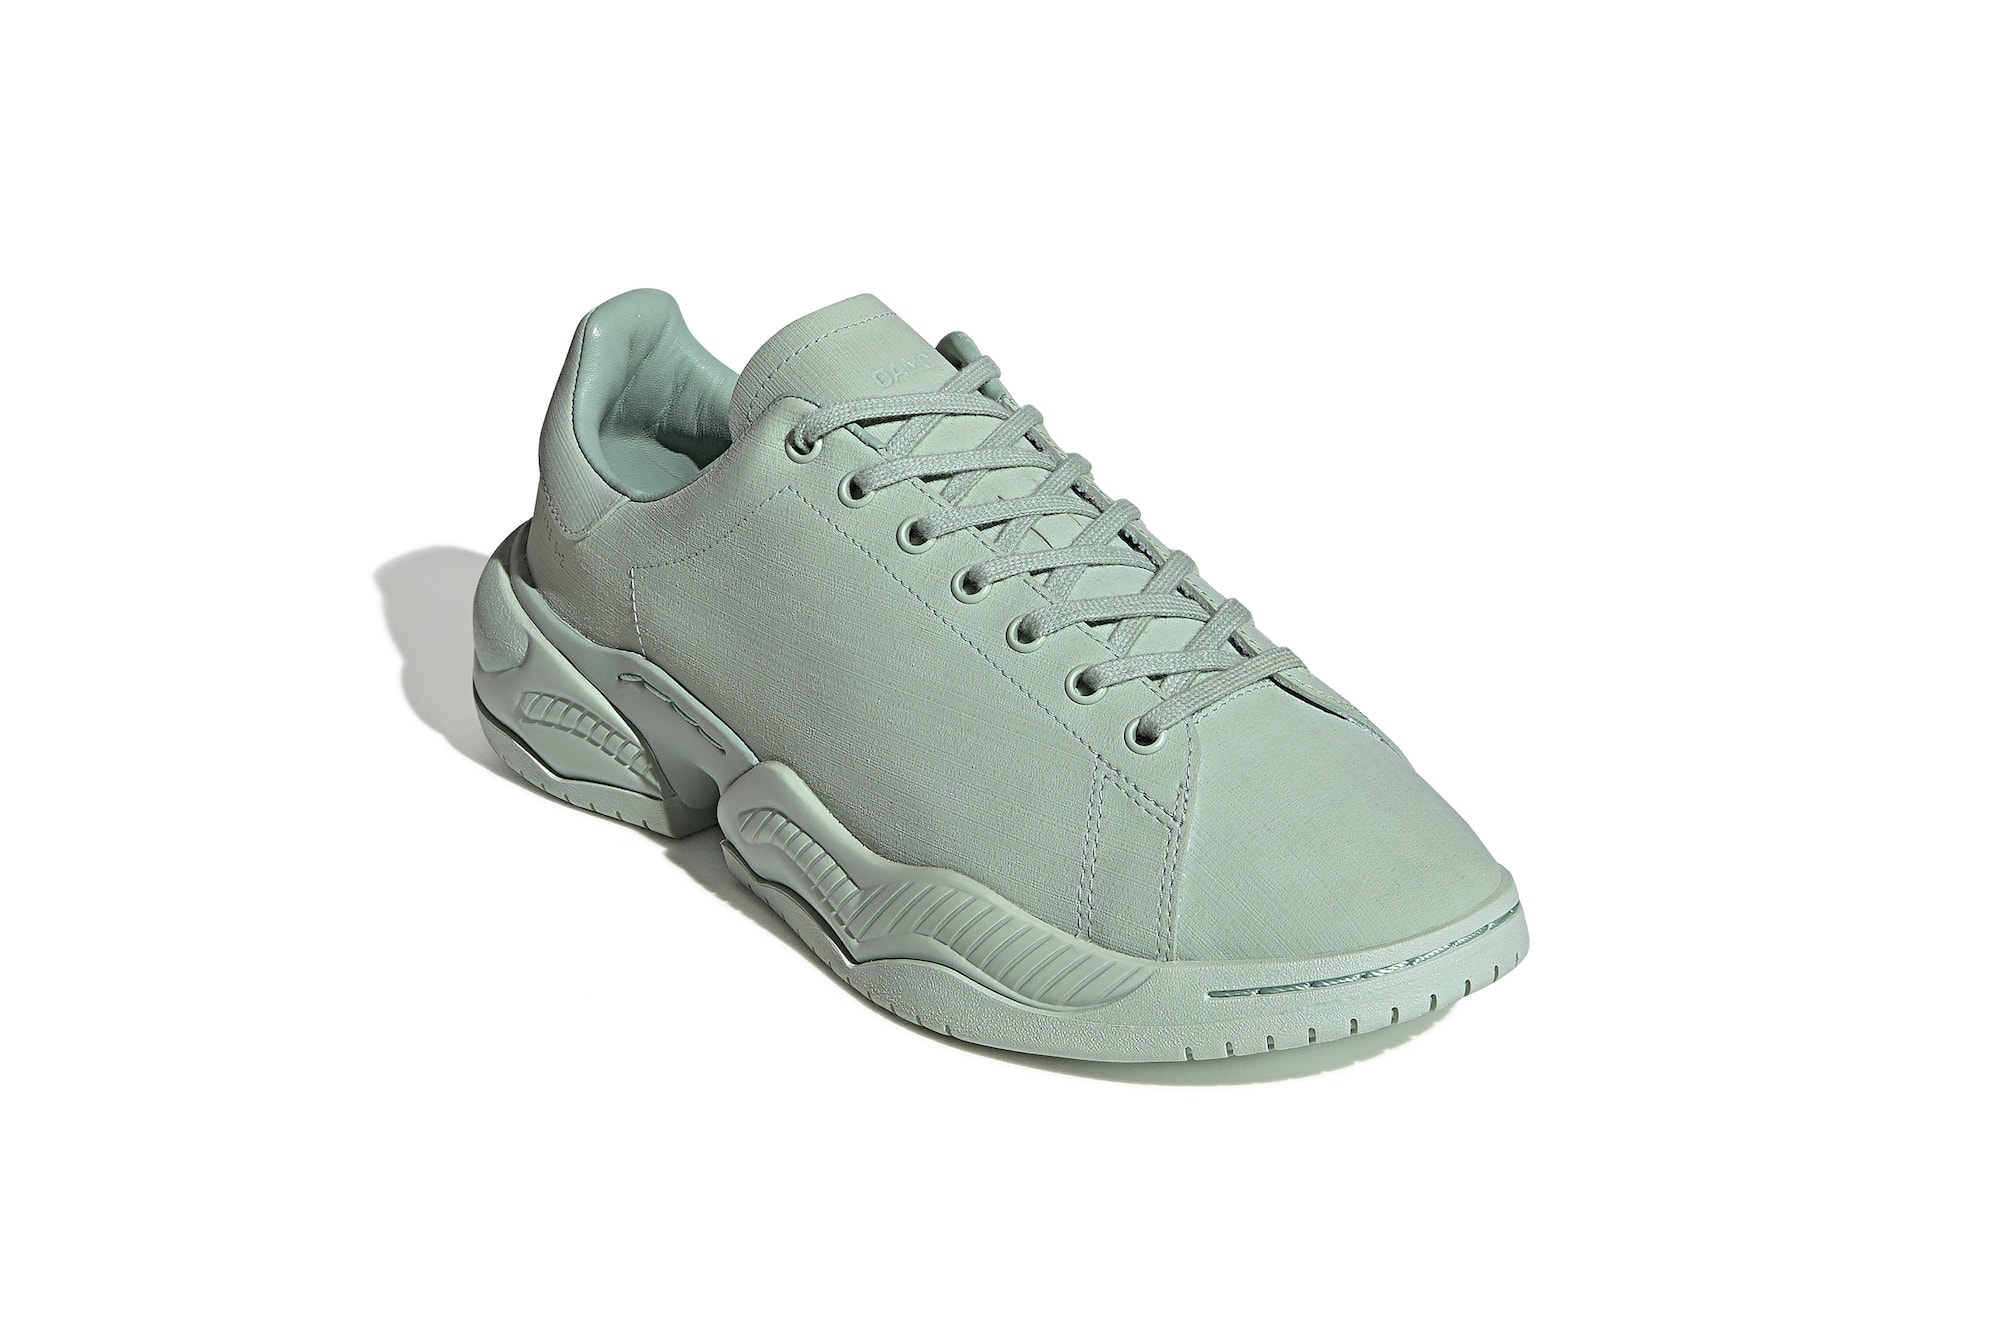 OAMC x adidas Originals Type O-2 Sneaker Release Mint Green White Cream Black Color Chunky Sole Minimal Trainer Shoe Footwear 